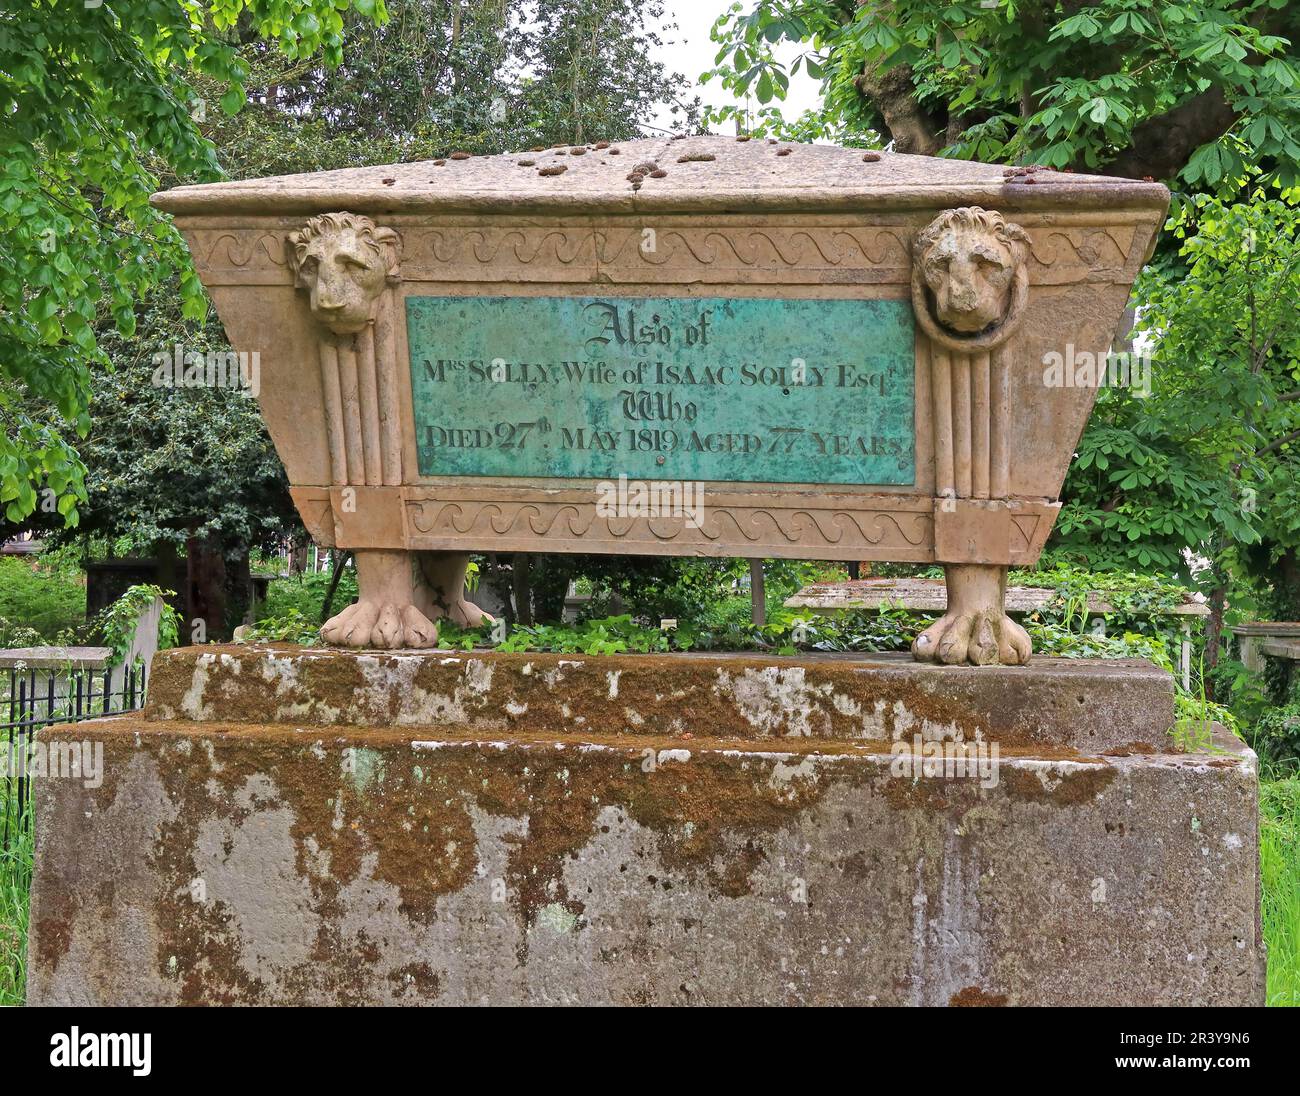 Graveyard of  St Marys Church, Isaac Solly, stone casket grave,  27-05-1819, with sad lions Stock Photo